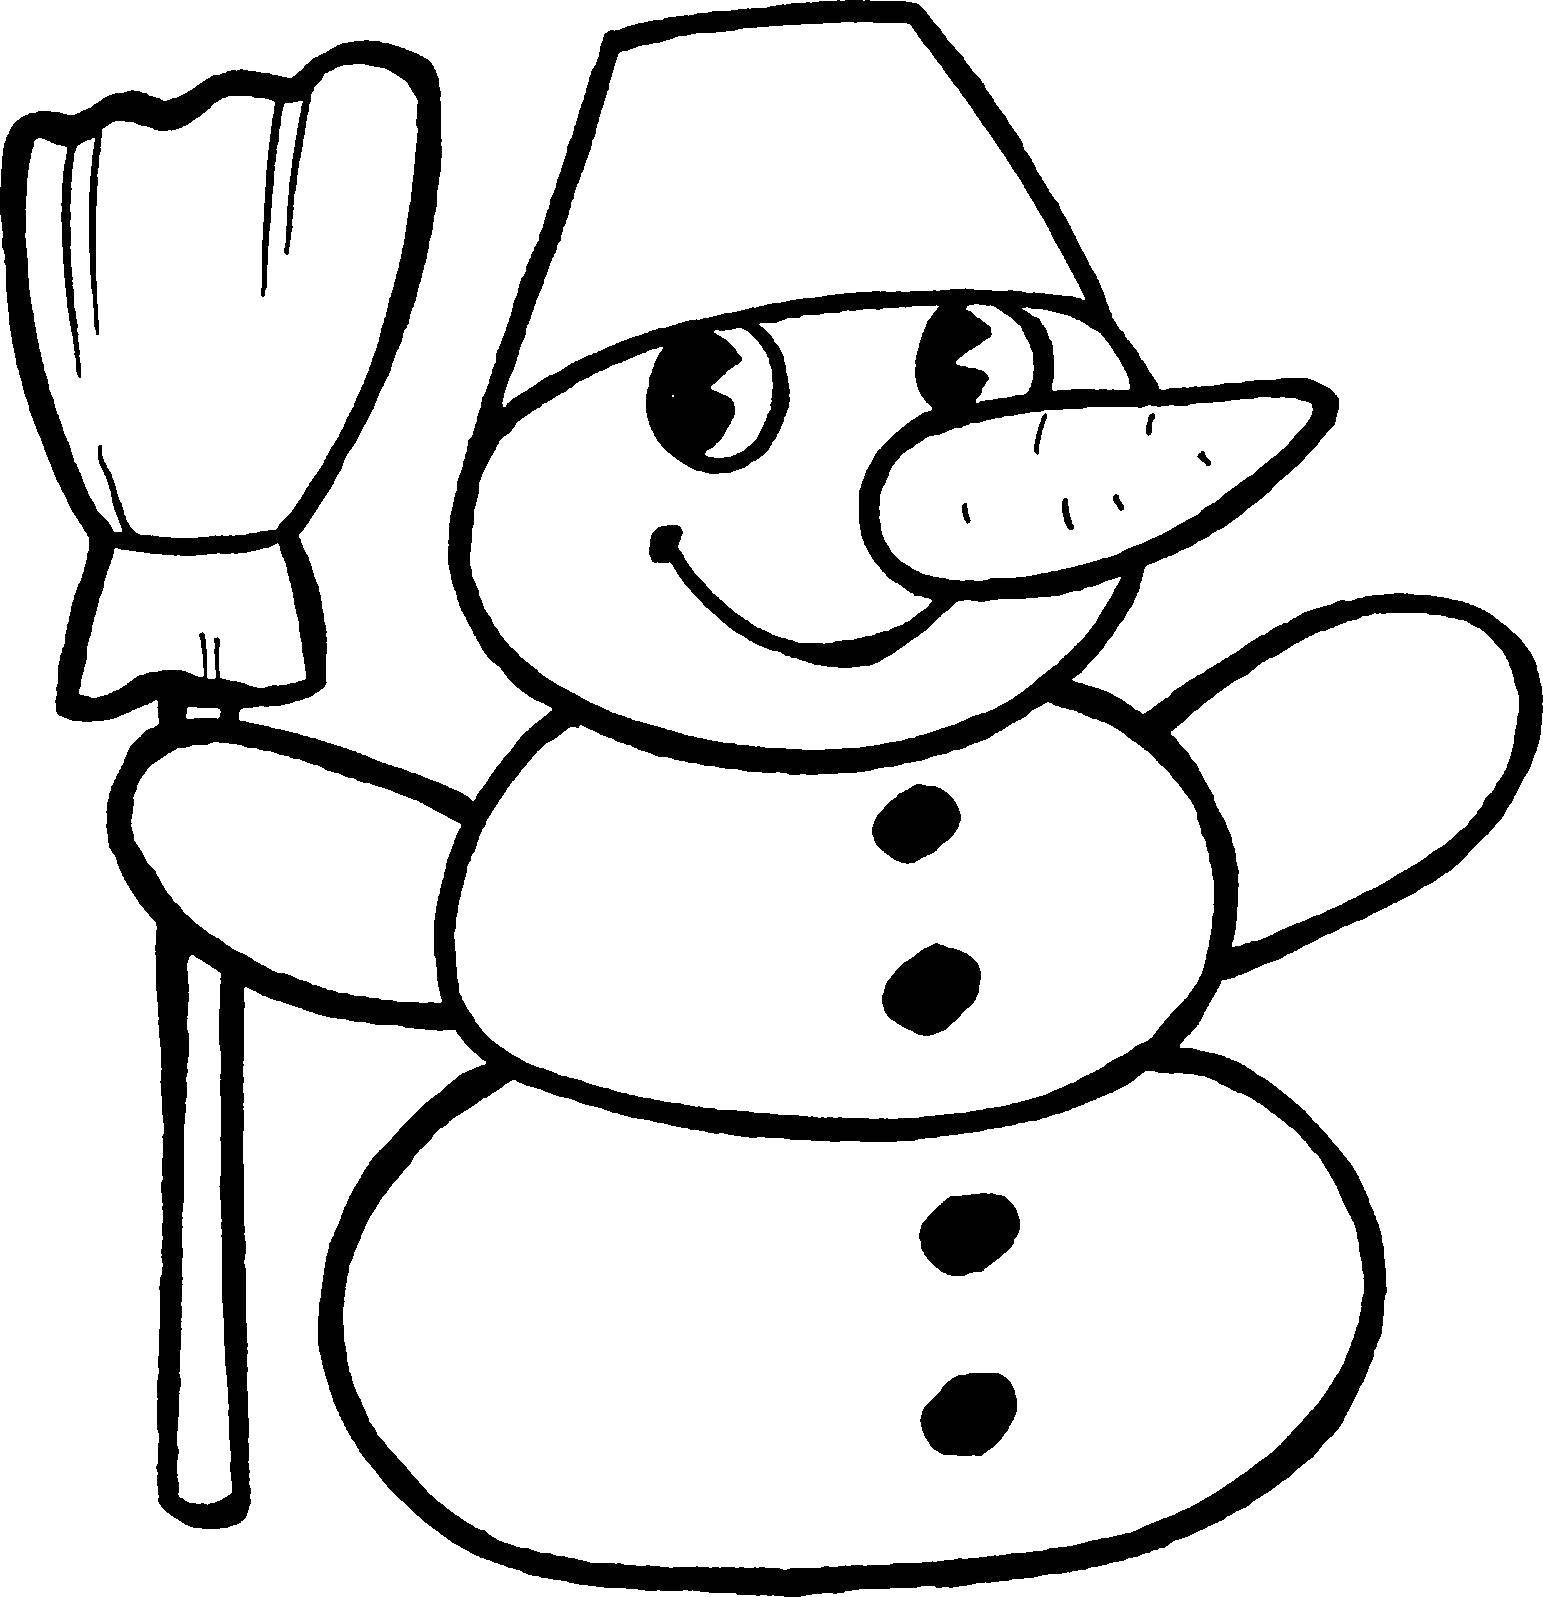 Coloring The snowman with broom. Category snowman. Tags:  Snowman, snow, winter.